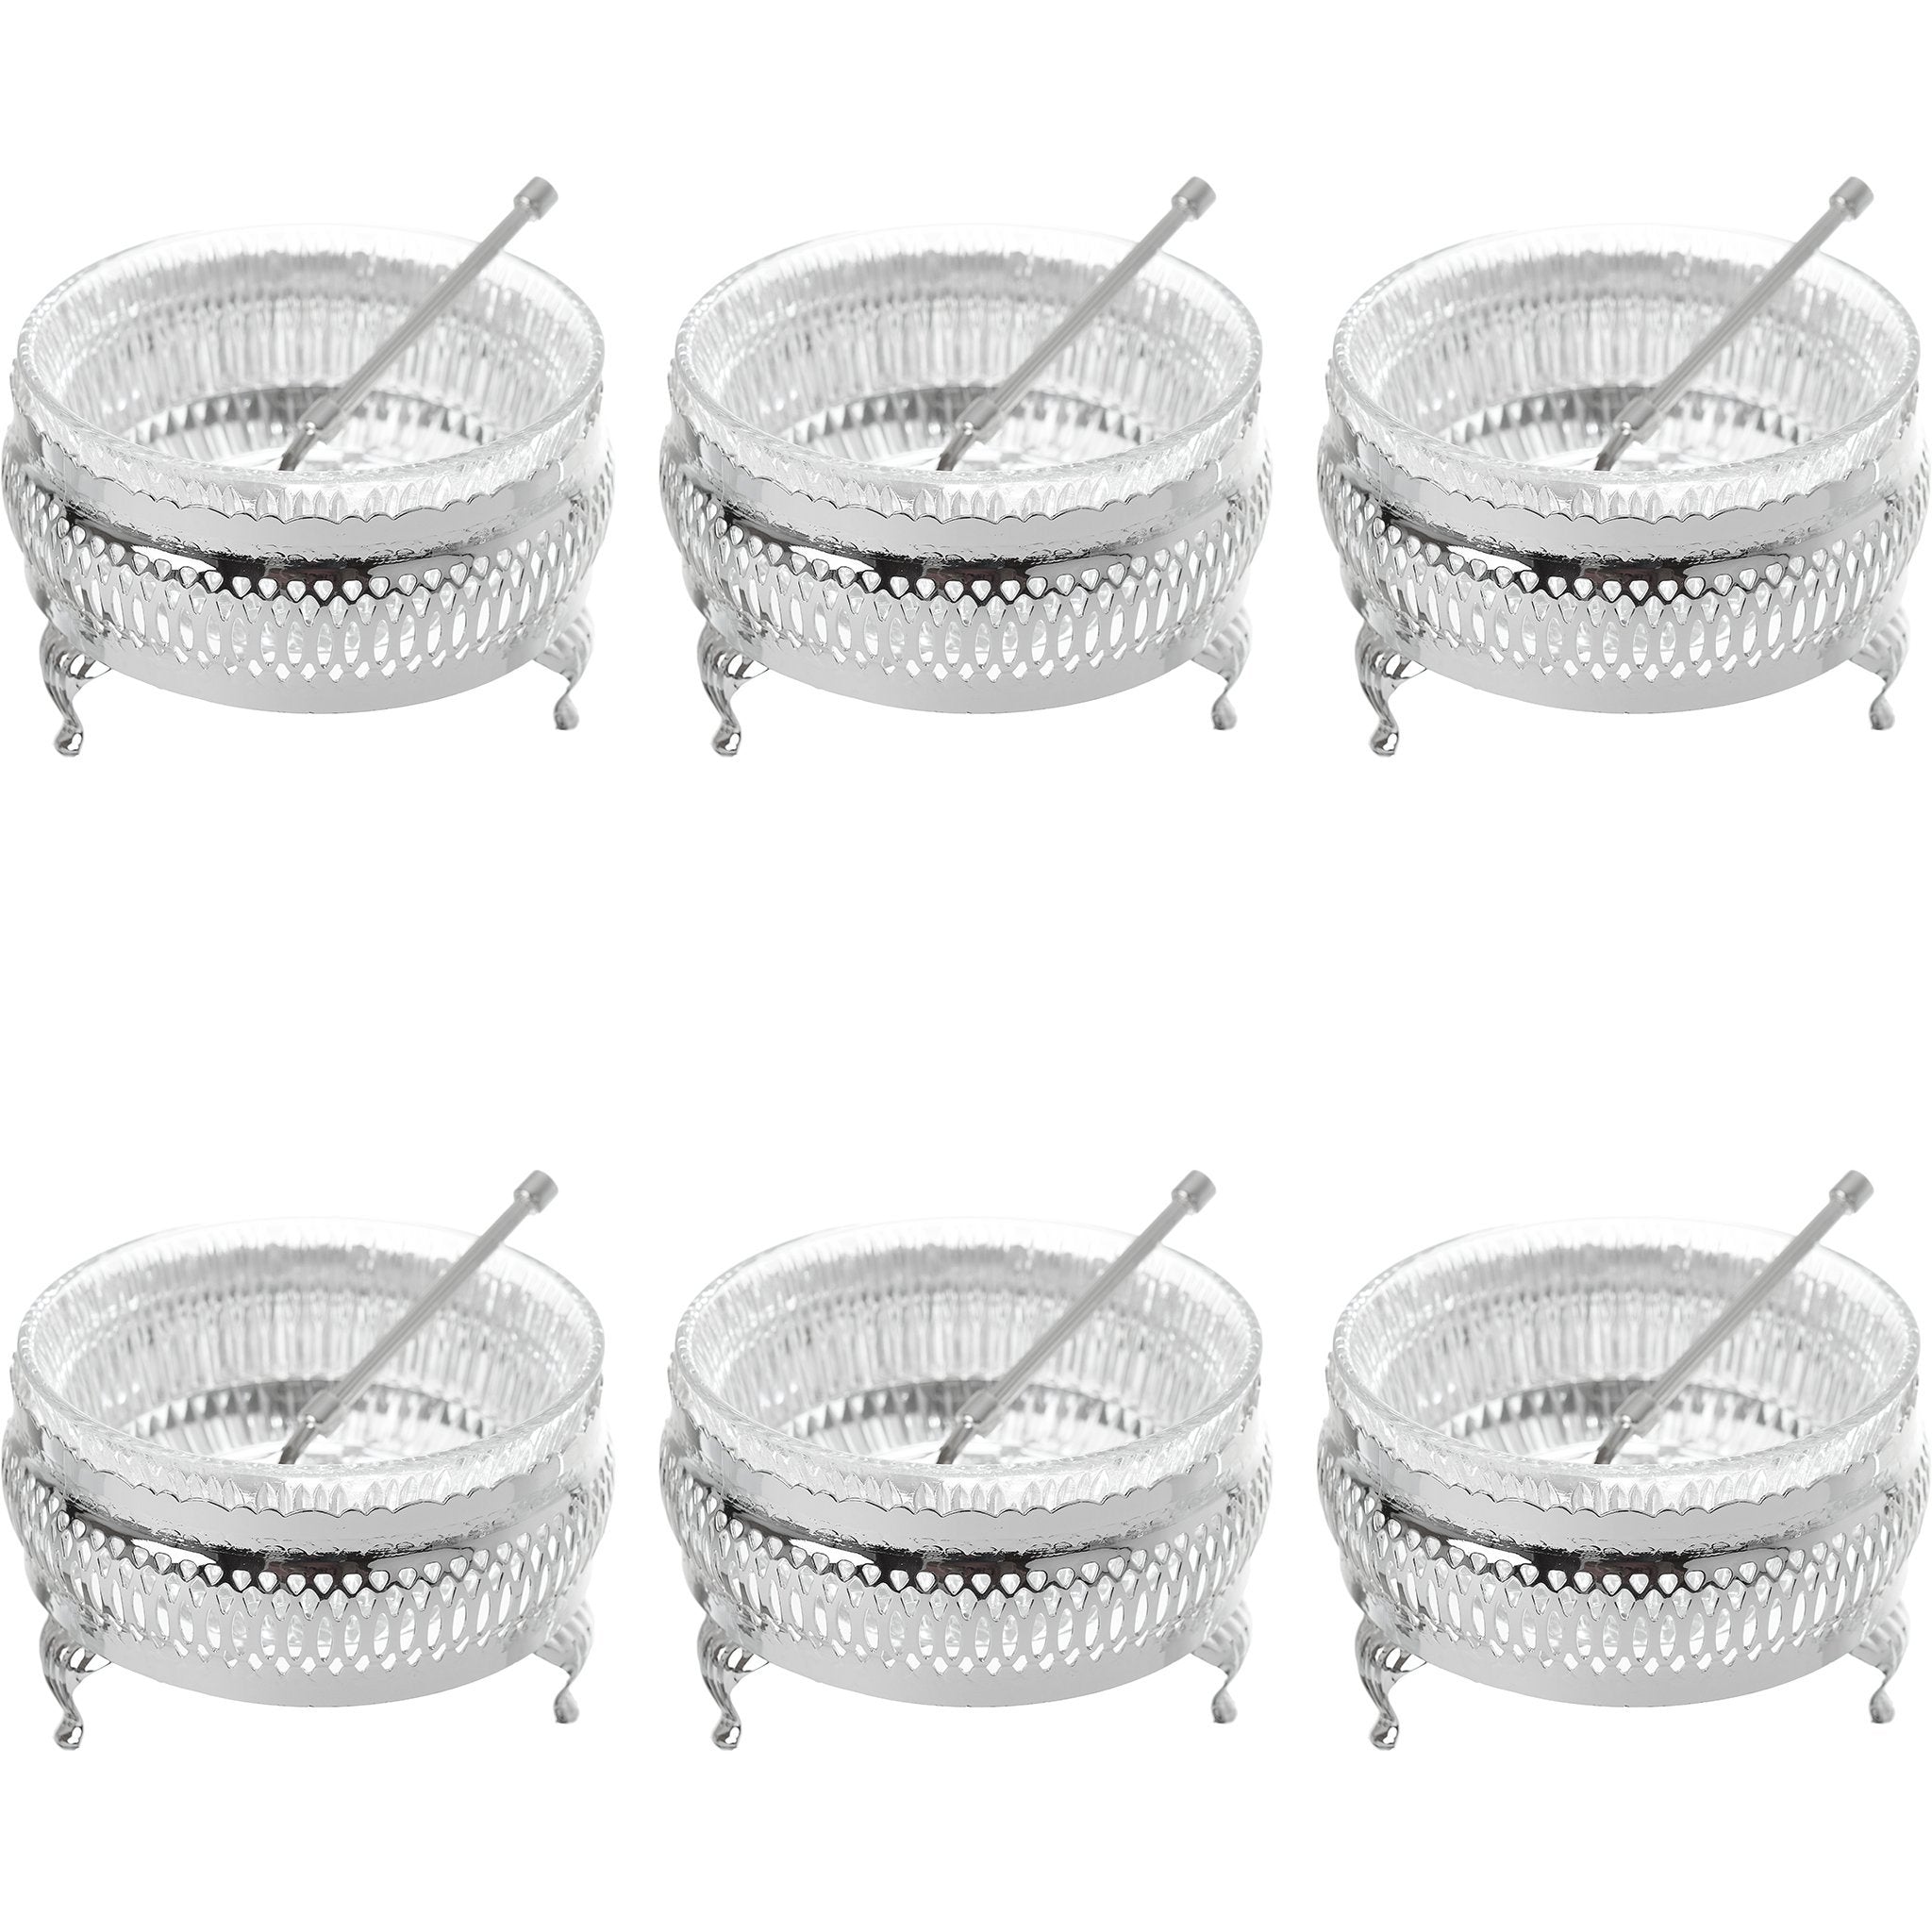 Queen Anne - Bowl Set with Dessert Spoons 6 Pieces - Silver Plated Metal with Glass - 26000372